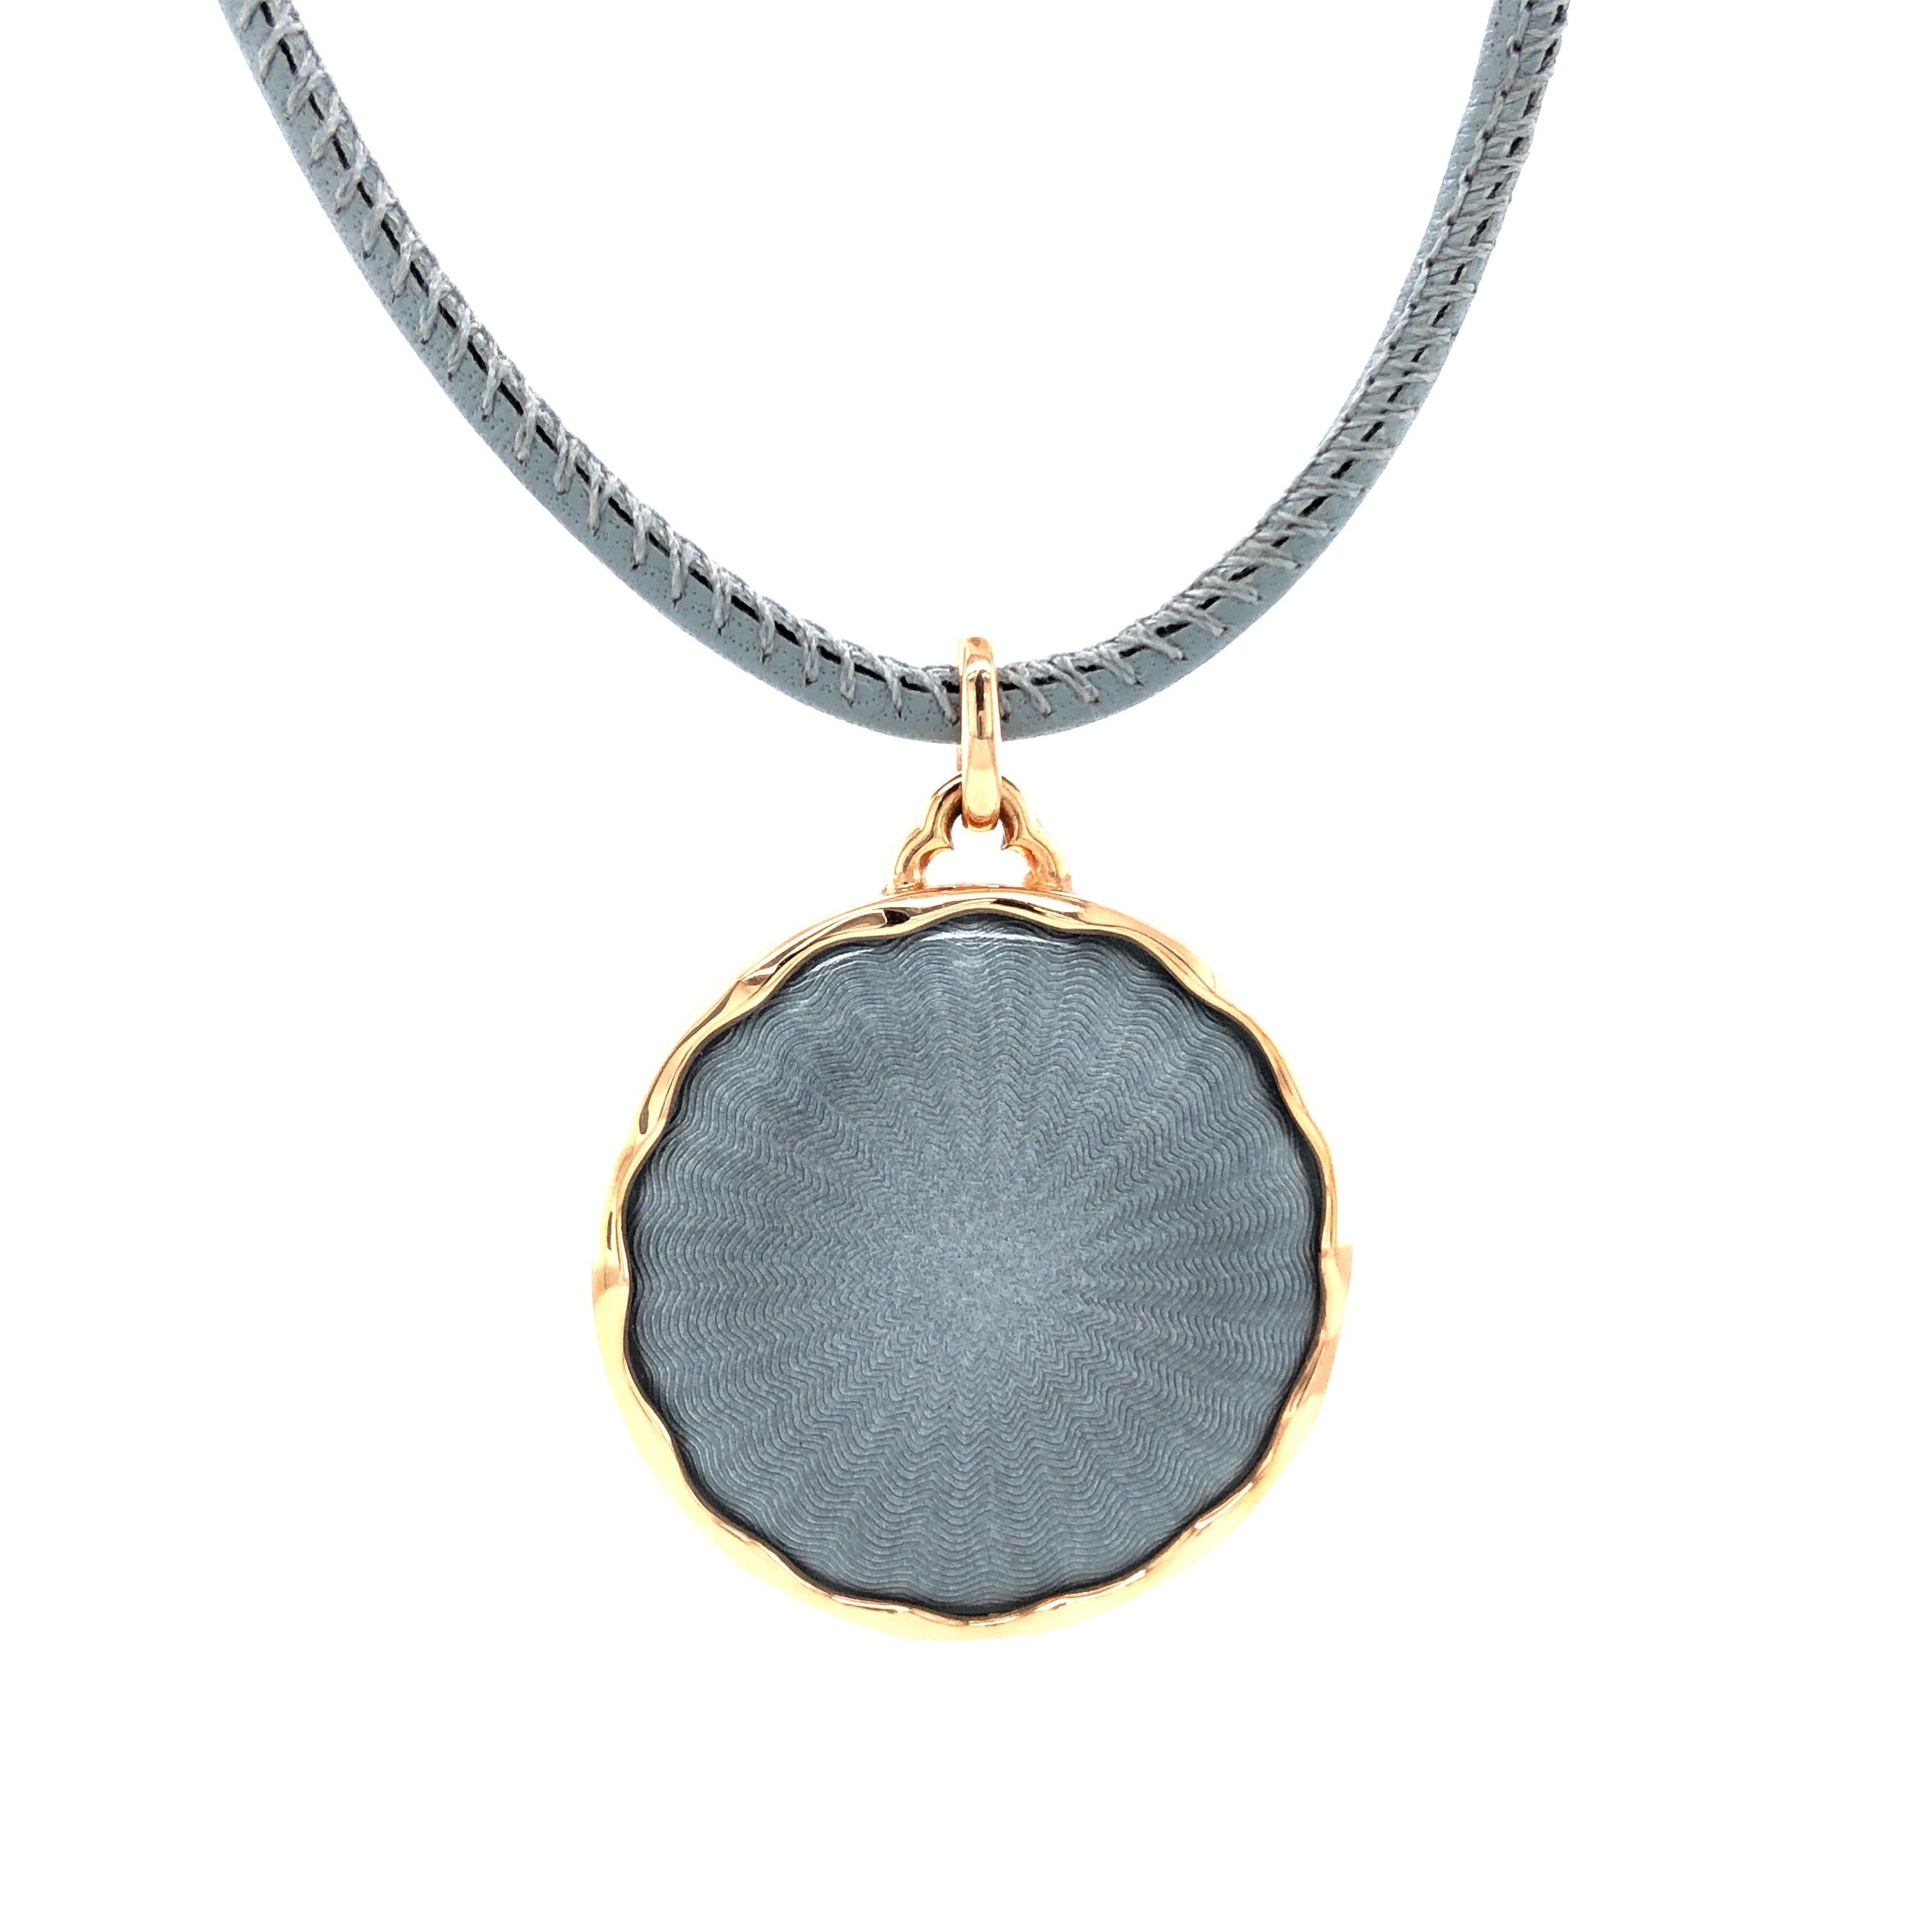 Victor Mayer round pendant collier 18k white gold/925-sterling silver, Macaron Collection, translucent grey vitreous enamel, guilloche, grey leather strap, diameter app. 27.2 mm

About the creator Victor Mayer
Victor Mayer is internationally